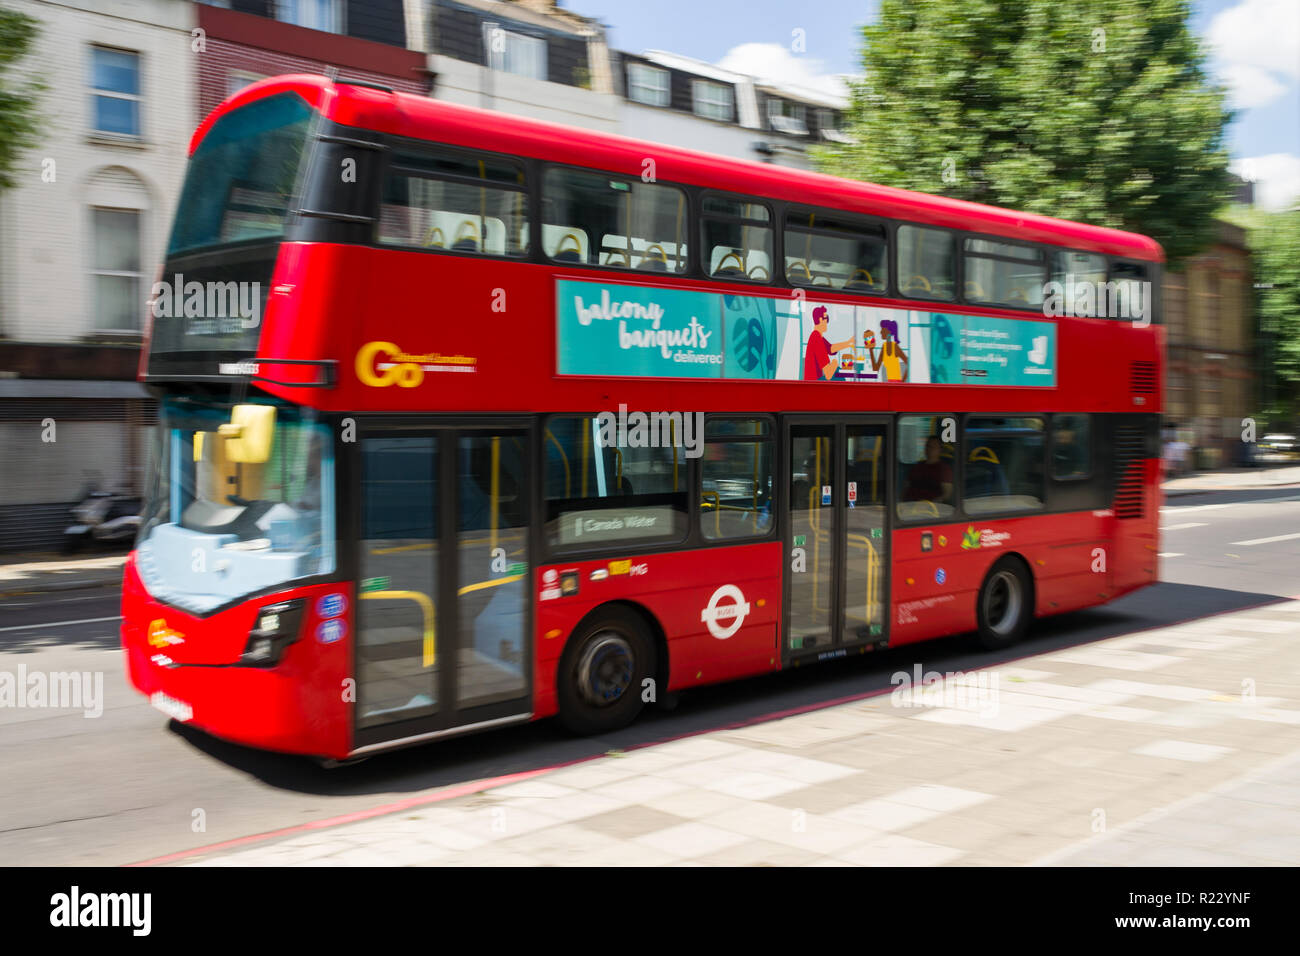 Panning image of a red double decker bus as it travels along a road in London on a sunny day, London, UK Stock Photo